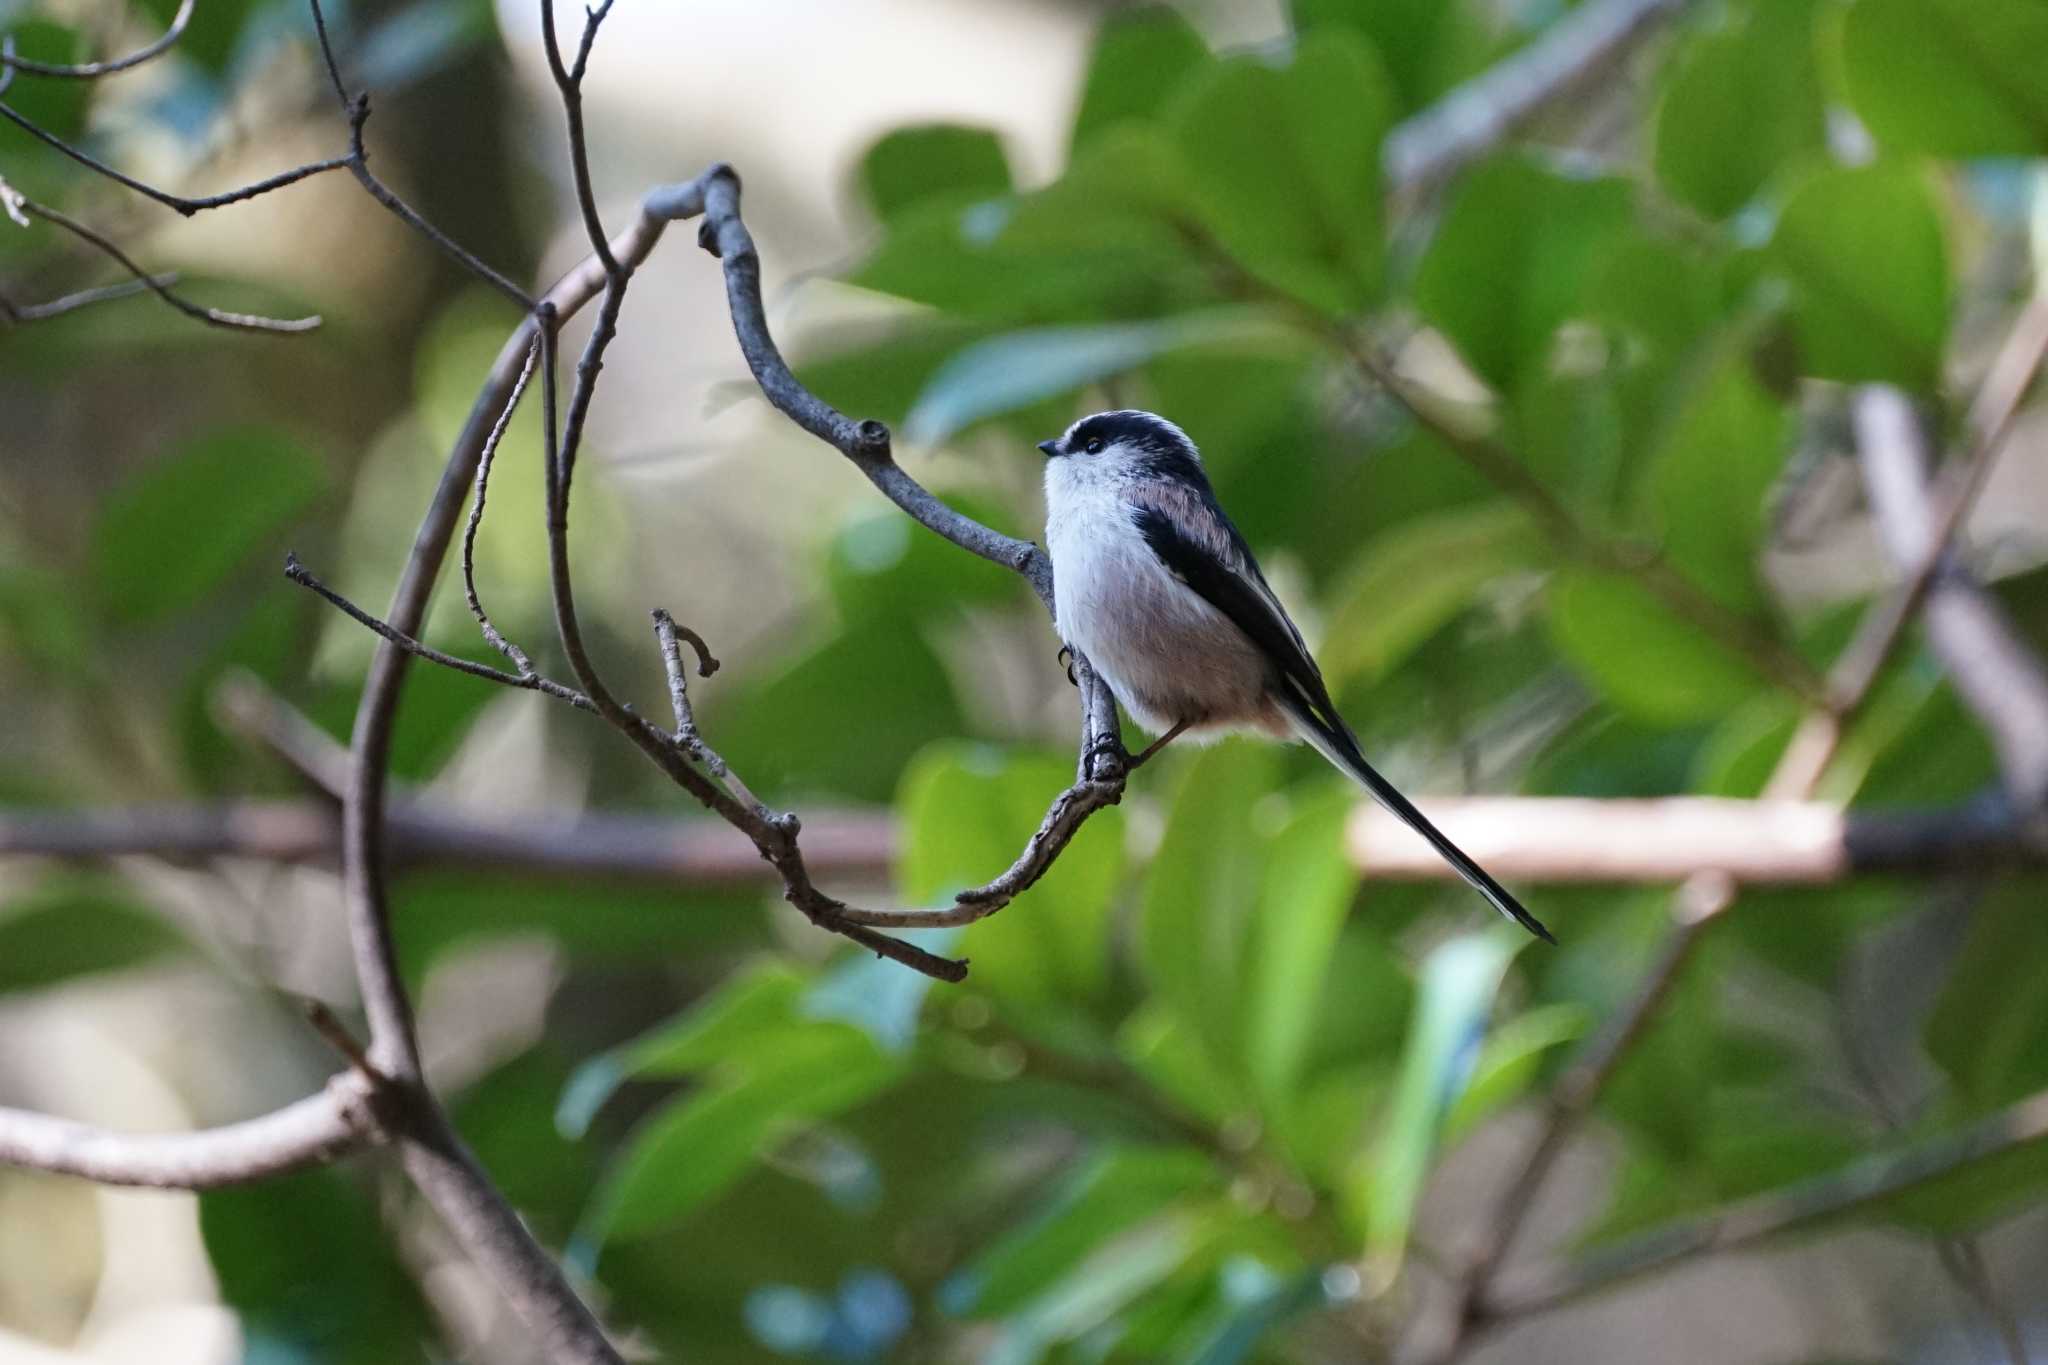 Photo of Long-tailed Tit at 宍道ふるさと森林公園 by ひらも